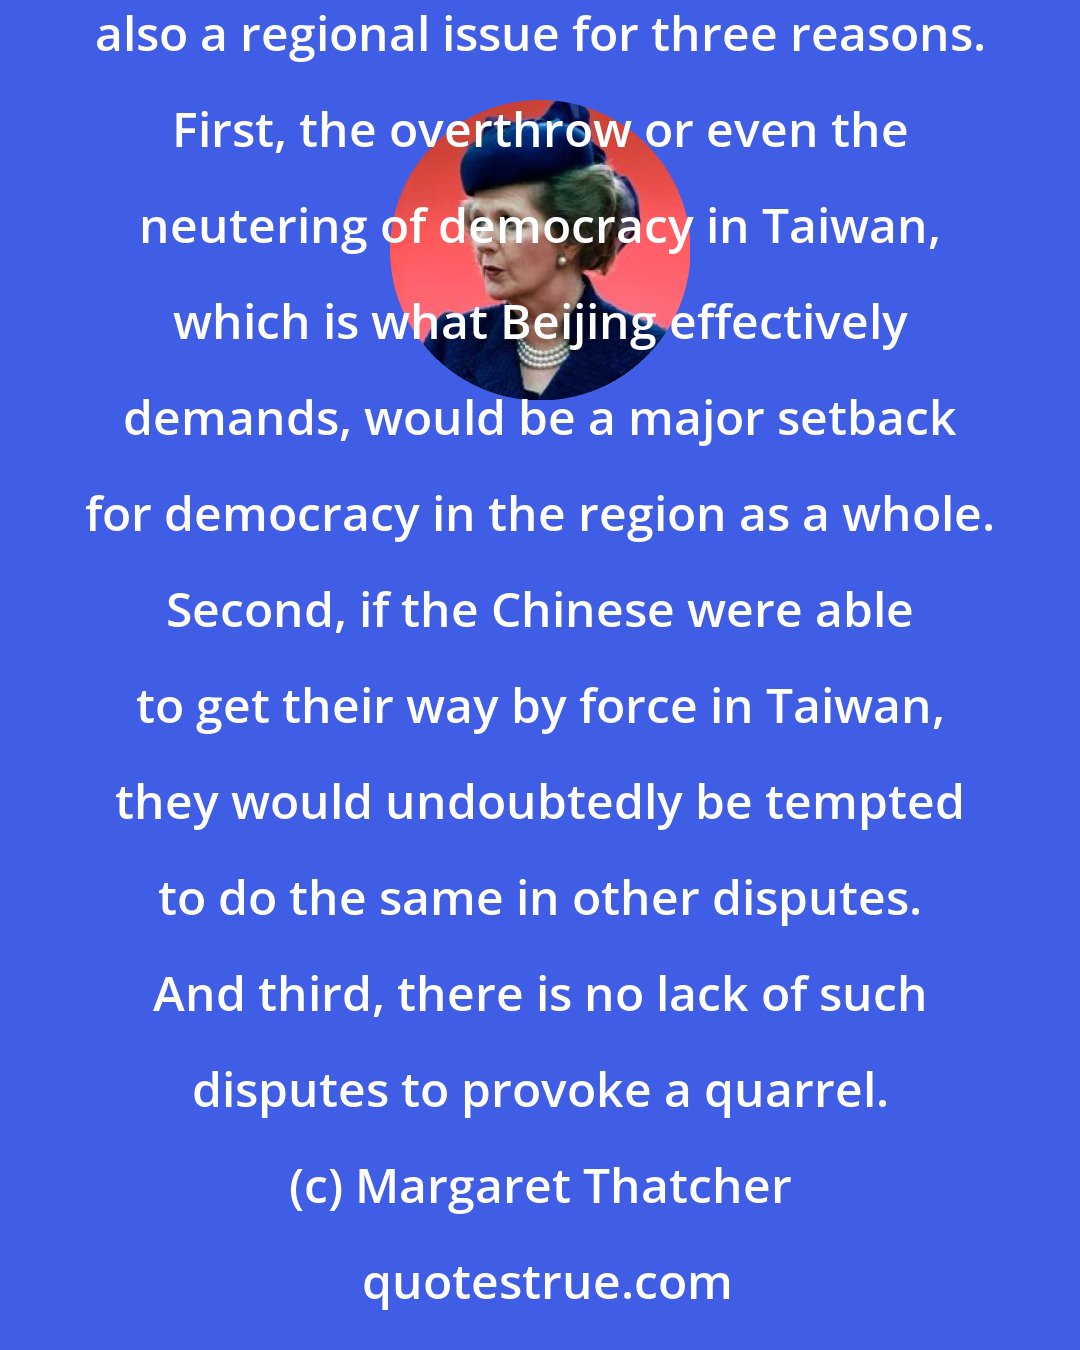 Margaret Thatcher: It can be argued - and rightly - that Taiwan is not just another regional issue: after all, the Chinese regard it as part of China. But Taiwan is also a regional issue for three reasons. First, the overthrow or even the neutering of democracy in Taiwan, which is what Beijing effectively demands, would be a major setback for democracy in the region as a whole. Second, if the Chinese were able to get their way by force in Taiwan, they would undoubtedly be tempted to do the same in other disputes. And third, there is no lack of such disputes to provoke a quarrel.